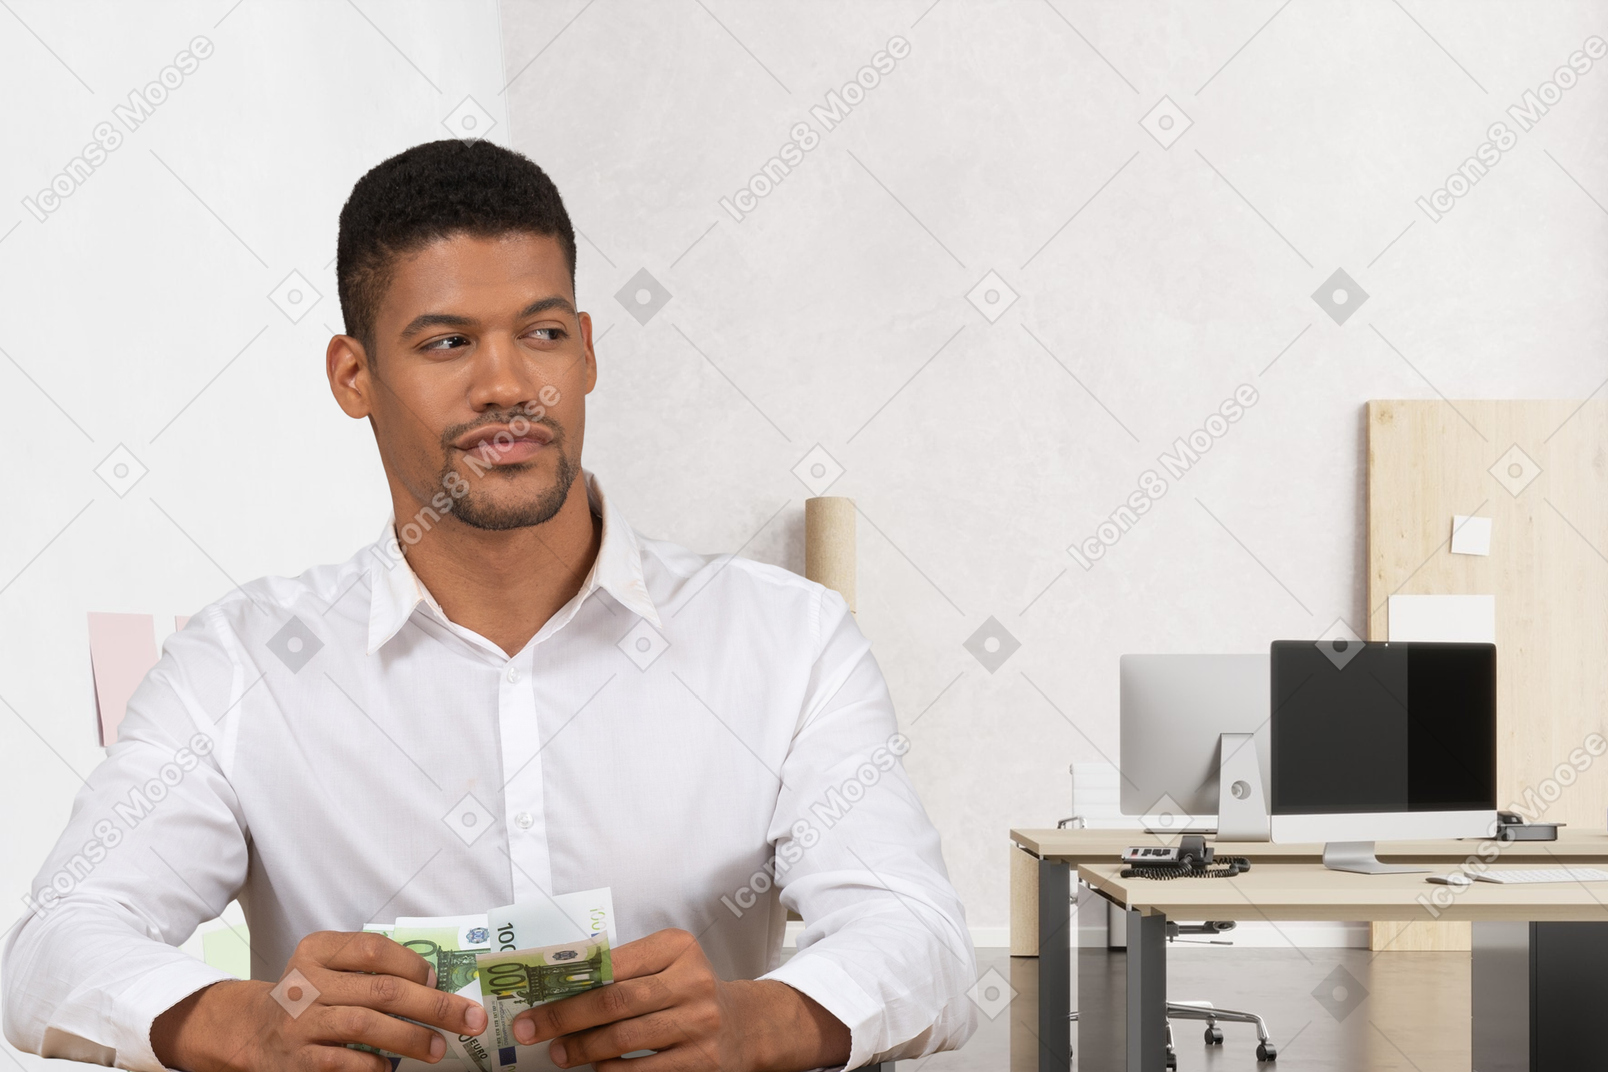 A man sitting at a desk holding a stack of money